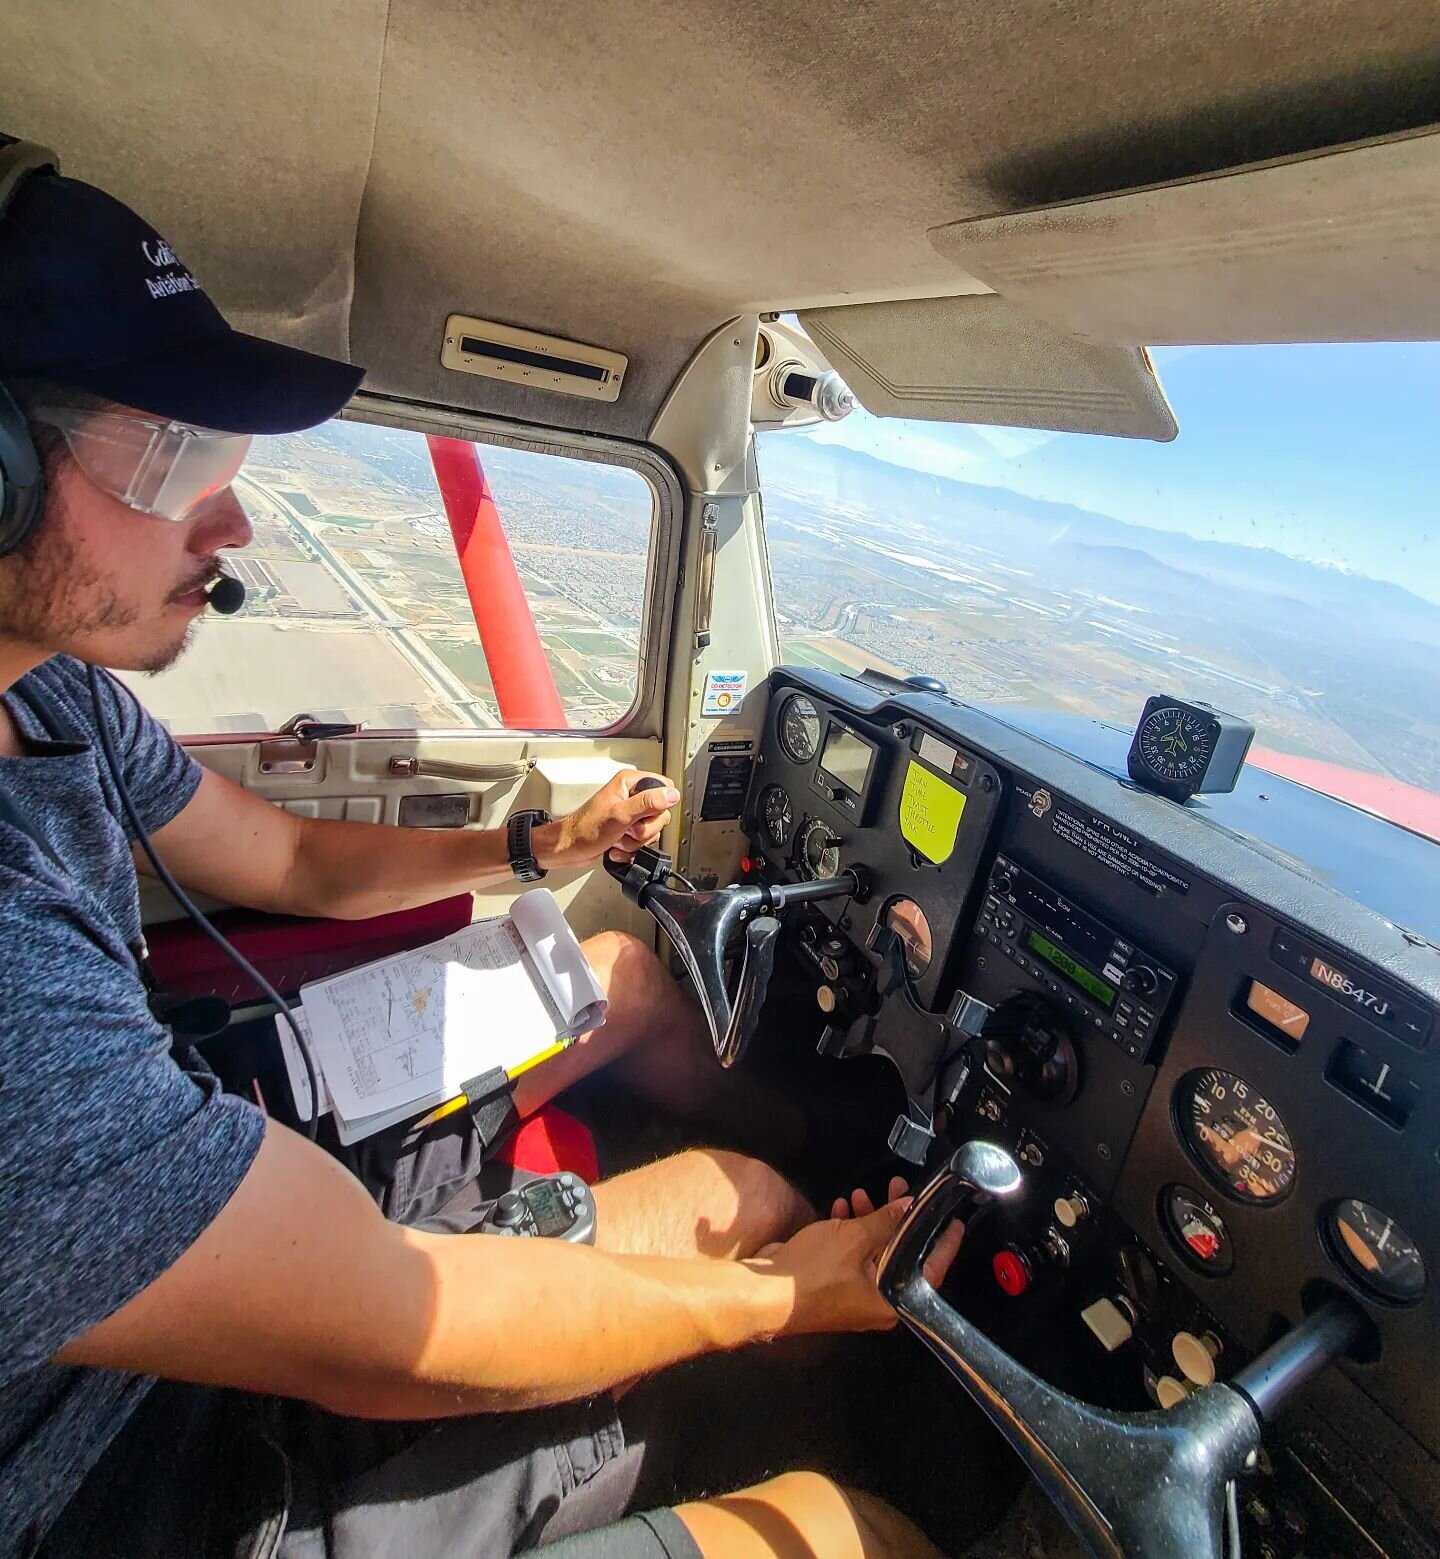 Foggles on, Instrument approach plate attached to knee board, Timer set and the 5 T's posted. 🧐
An inside look of our Instrument training course. 🛬

#californiaaviationservices #ils #vor  #flightschool #learntofly #asel #ppl #cessna172 #cessna #ces